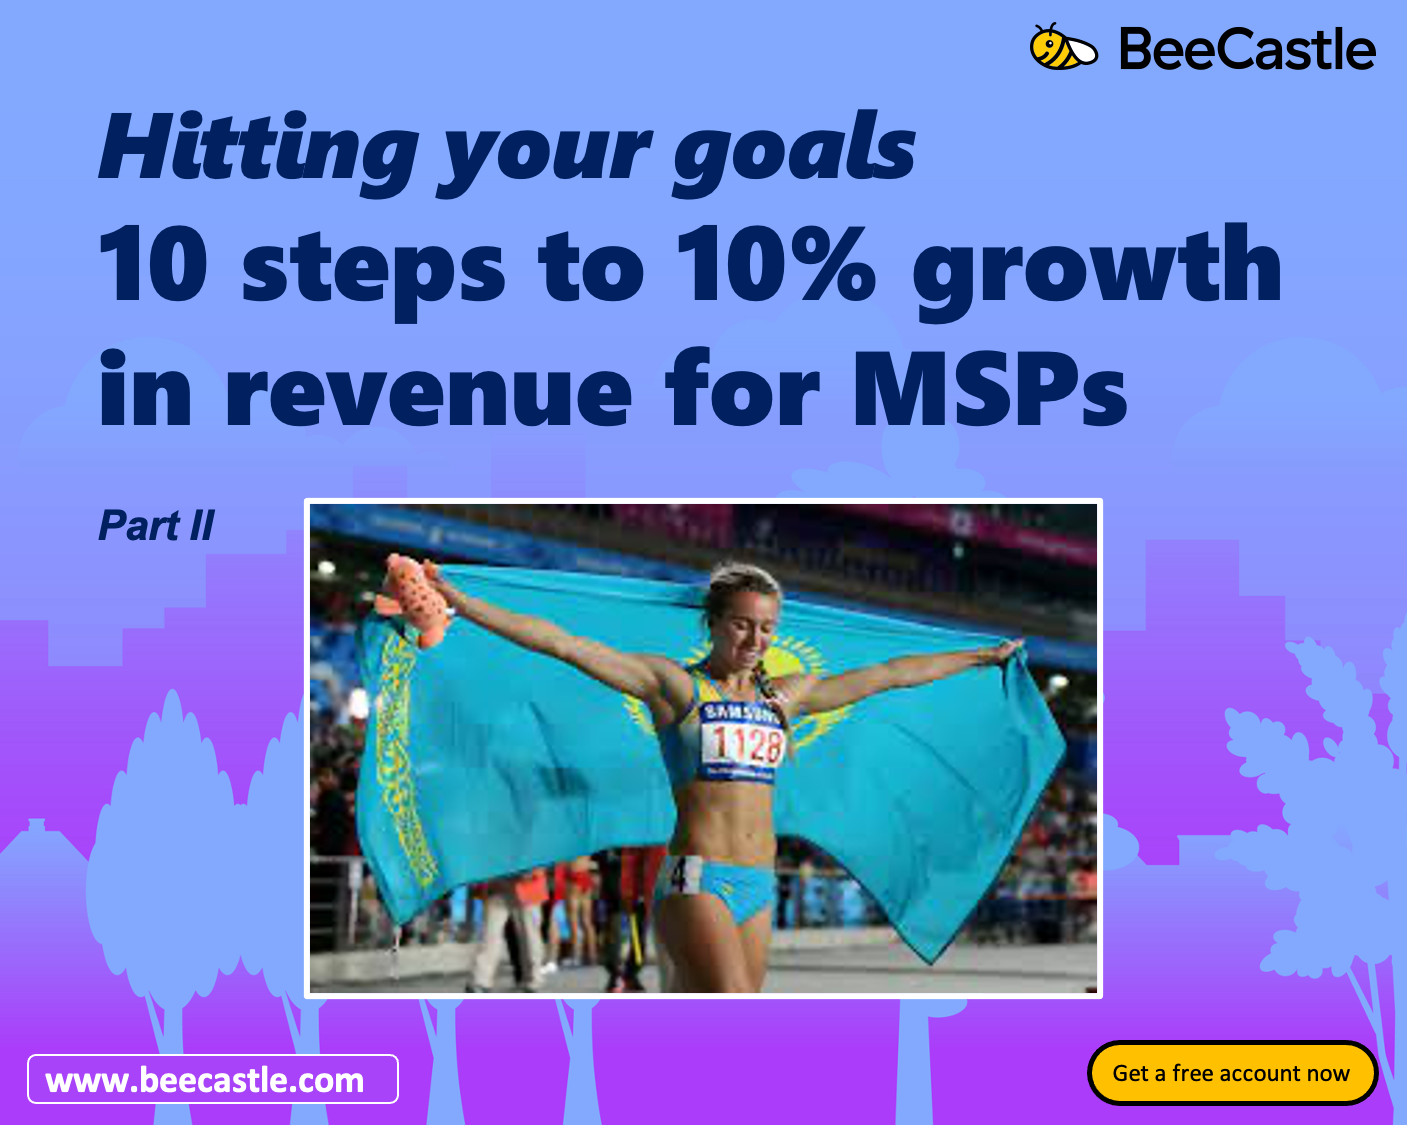 Thumbnail of 10 steps to 10% growth in revenue for MSPs - Part II